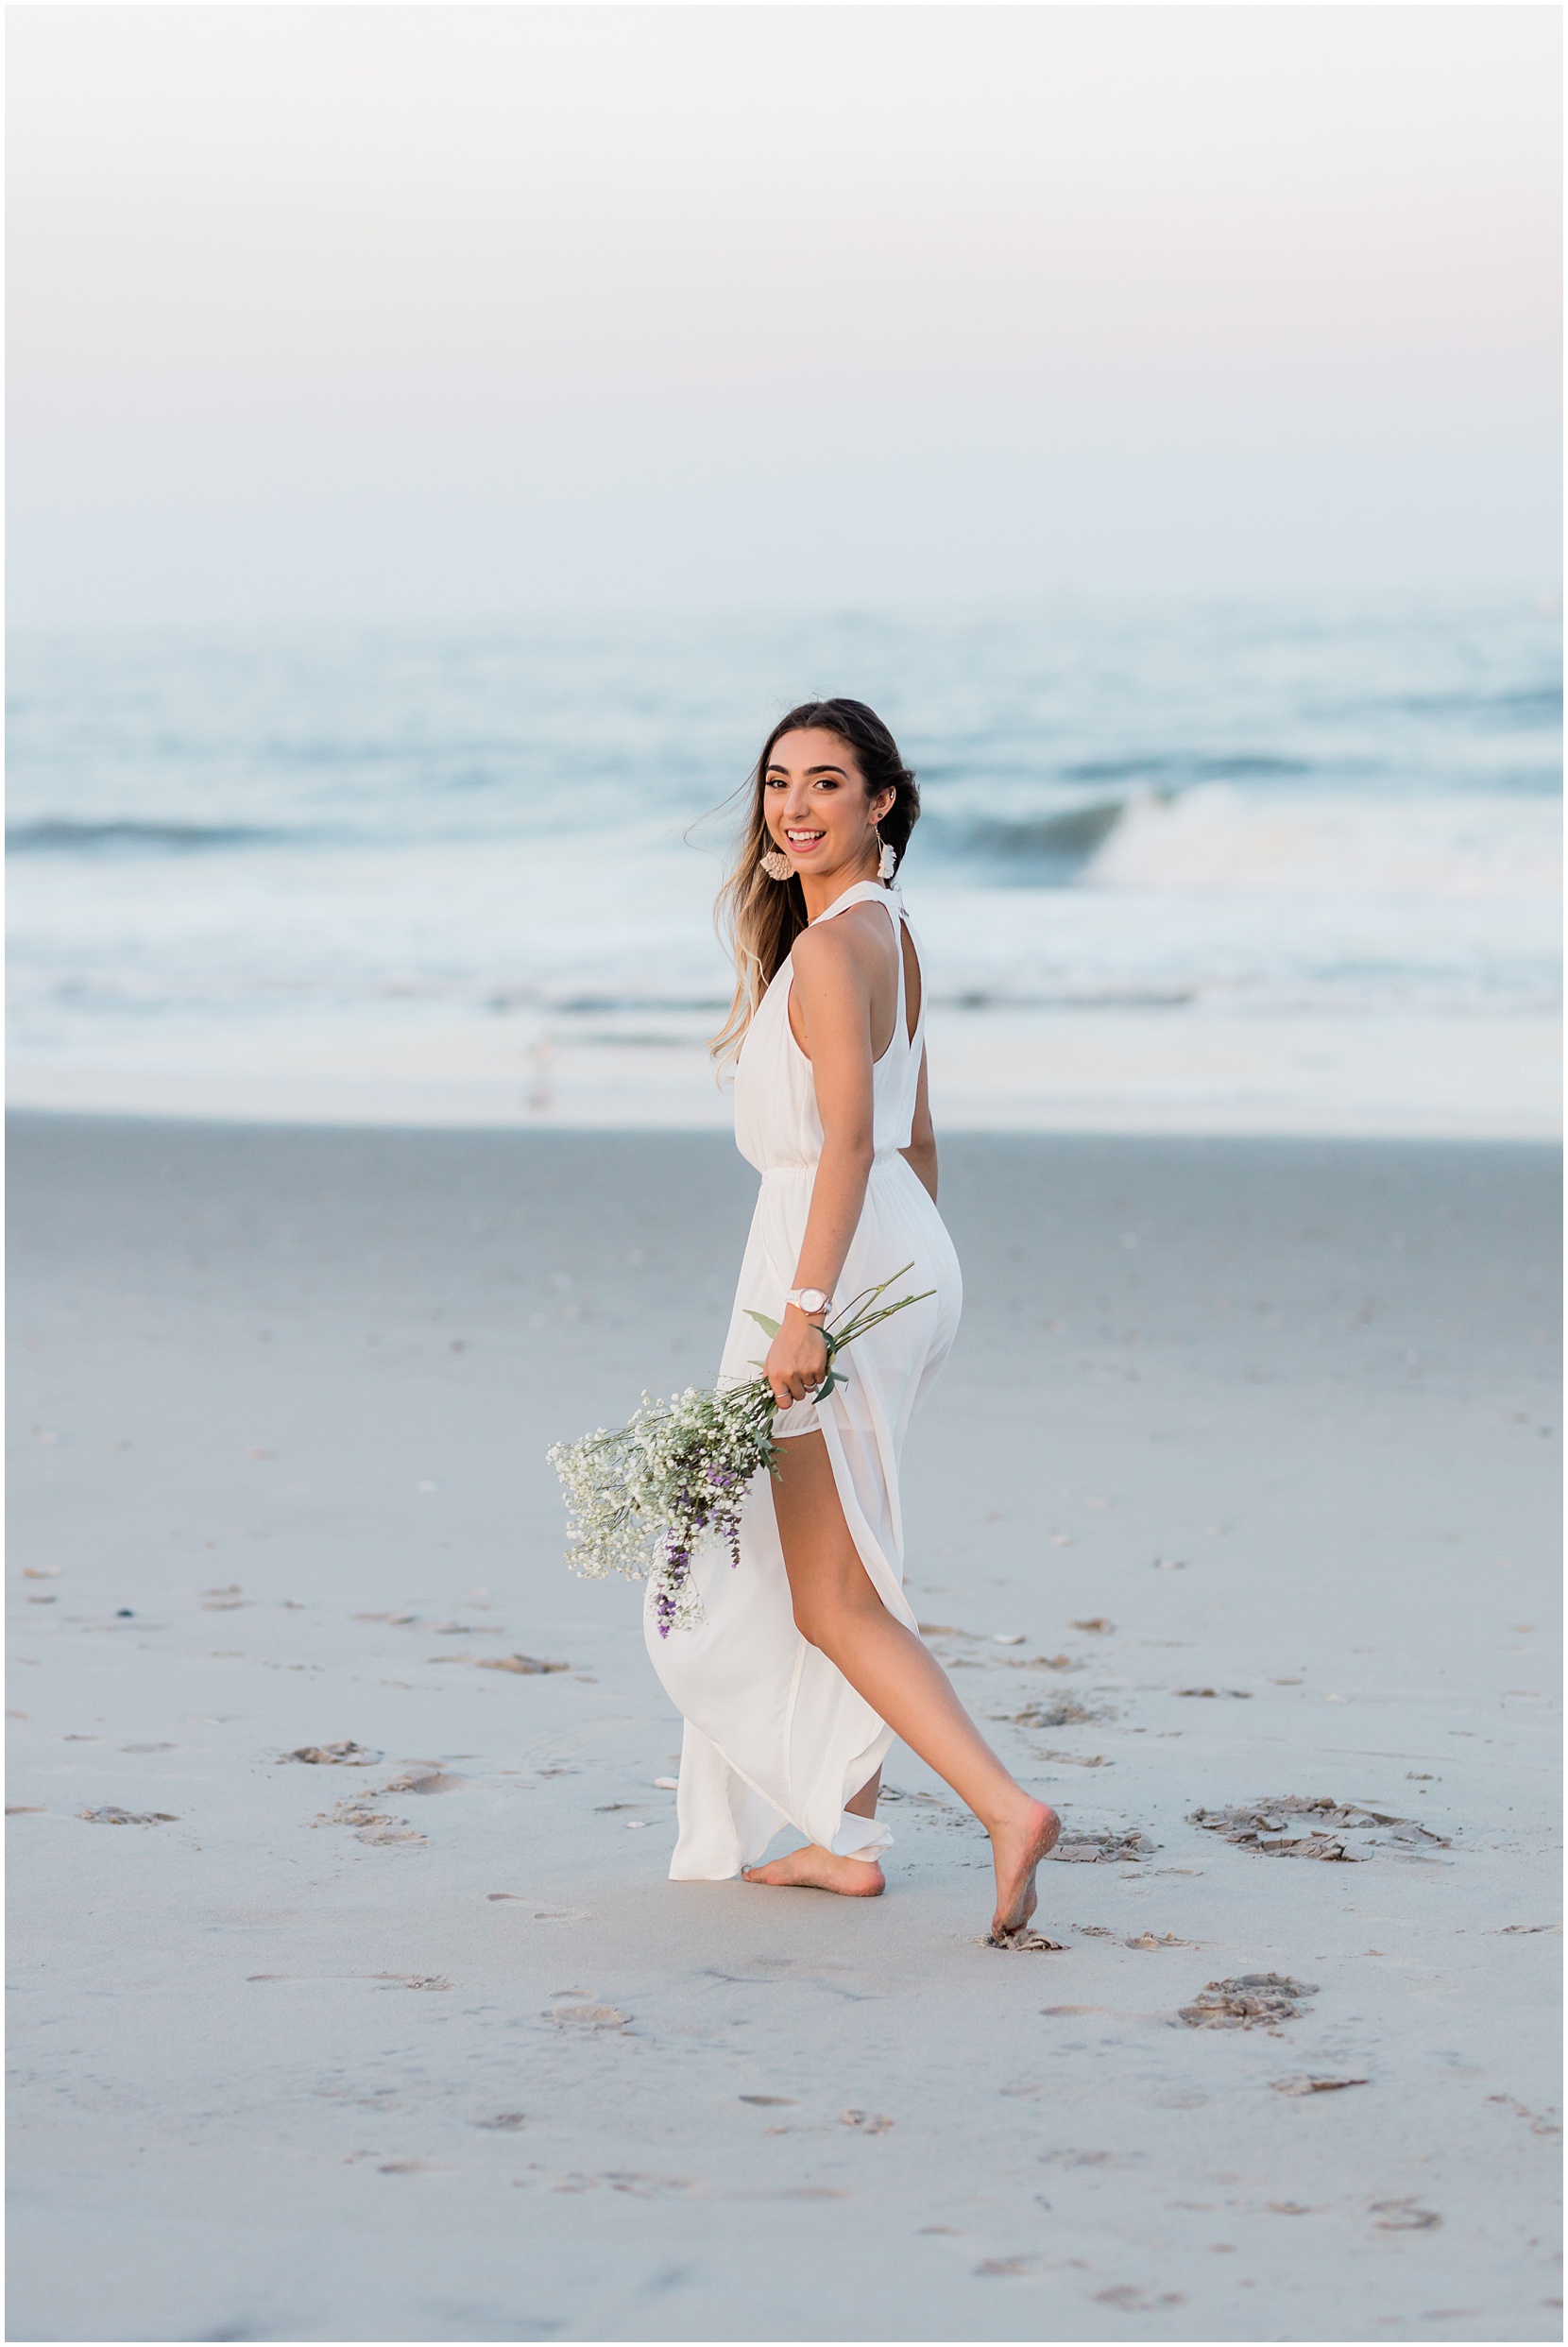 teen girl skipping on the beach with flowers